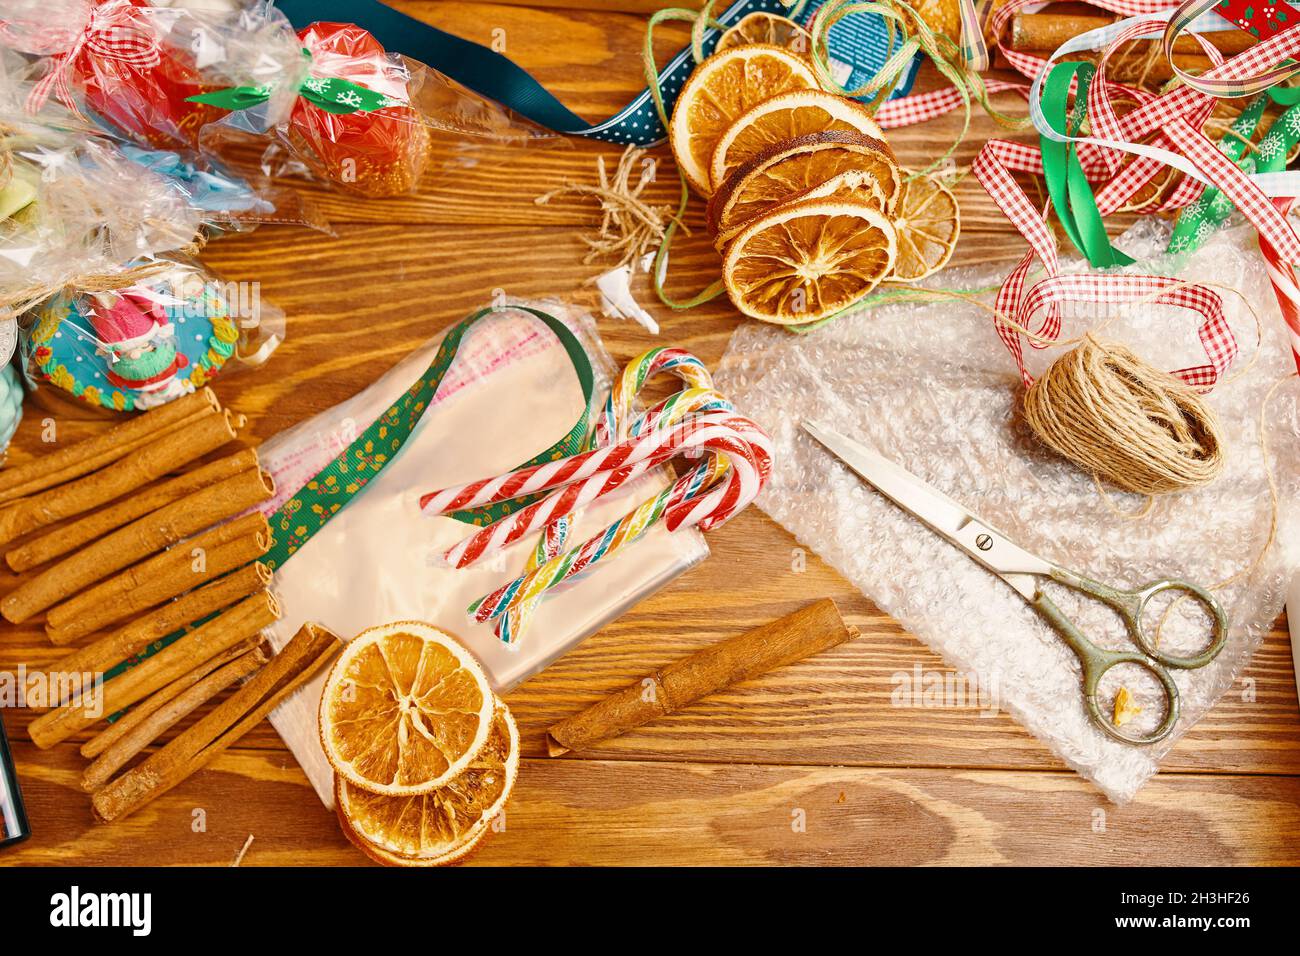 Wooden table with Christmas decor. Cinnamon sticks, candy canes, souvenirs, slices of dried oranges, colorful ribbons, scissors and wrapper. New Year's composition. Gift packaging. Stock Photo